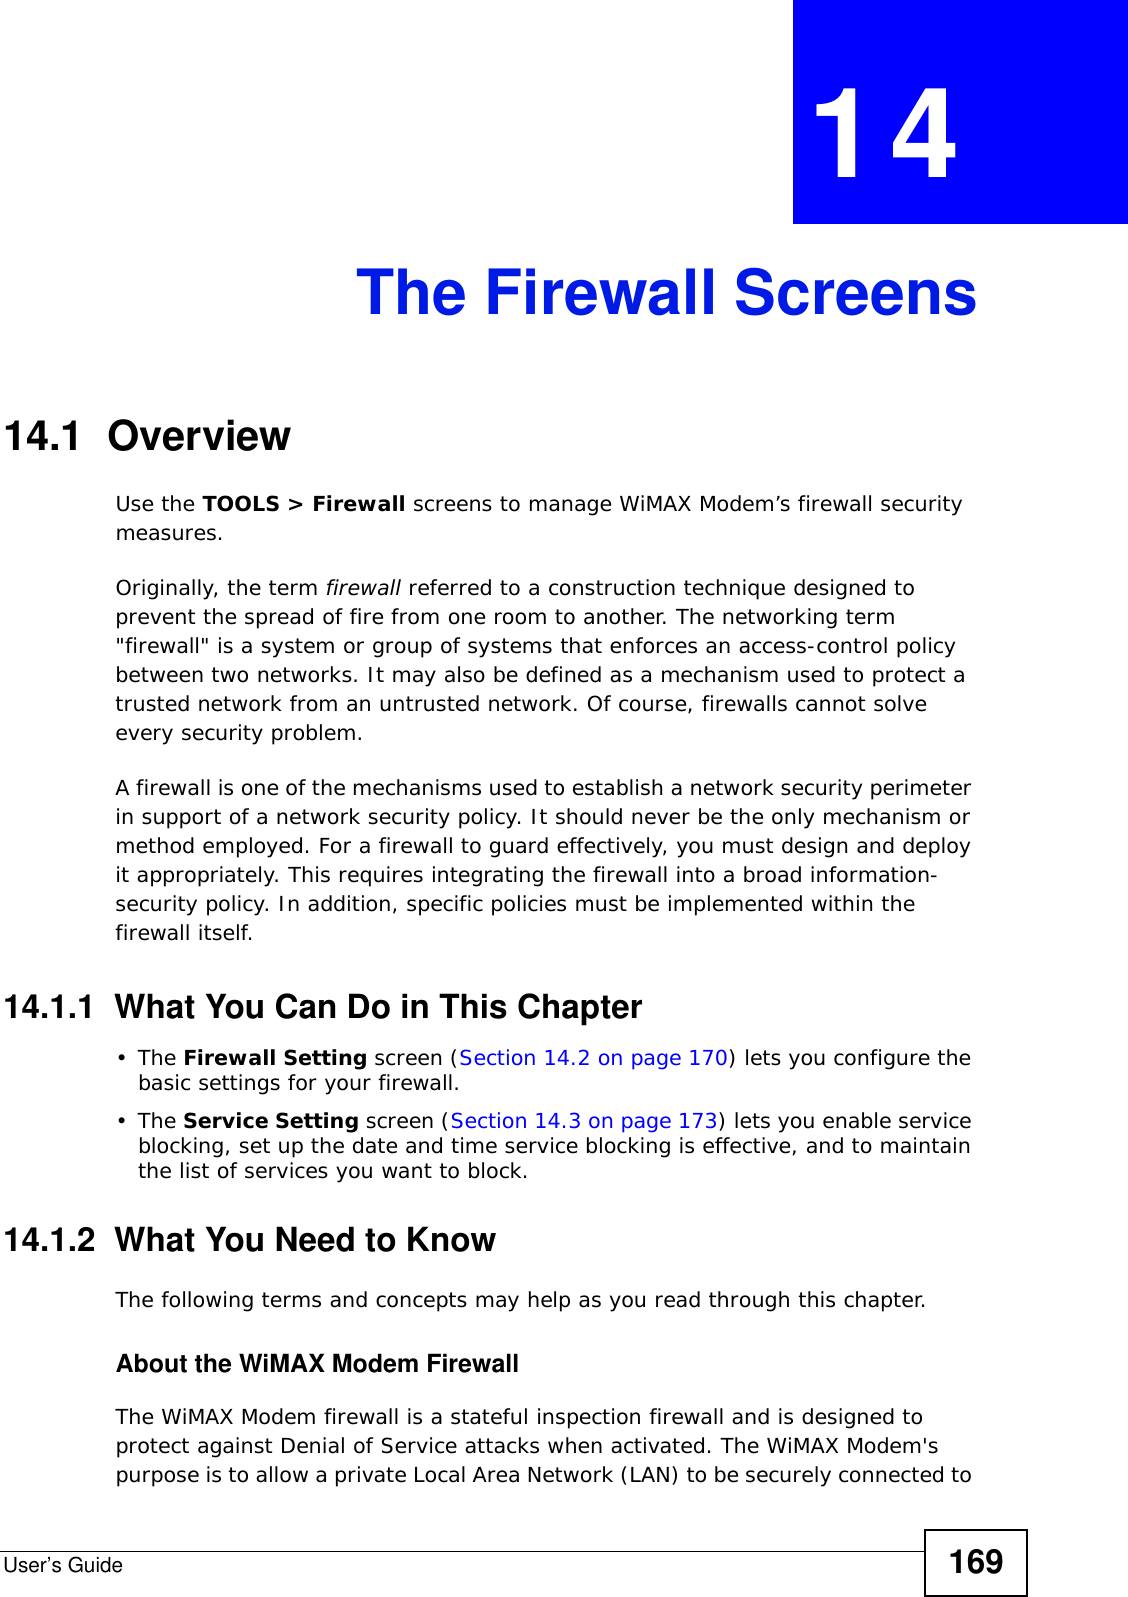 User’s Guide 169CHAPTER  14 The Firewall Screens14.1  OverviewUse the TOOLS &gt; Firewall screens to manage WiMAX Modem’s firewall security measures.Originally, the term firewall referred to a construction technique designed to prevent the spread of fire from one room to another. The networking term &quot;firewall&quot; is a system or group of systems that enforces an access-control policy between two networks. It may also be defined as a mechanism used to protect a trusted network from an untrusted network. Of course, firewalls cannot solve every security problem.A firewall is one of the mechanisms used to establish a network security perimeter in support of a network security policy. It should never be the only mechanism or method employed. For a firewall to guard effectively, you must design and deploy it appropriately. This requires integrating the firewall into a broad information-security policy. In addition, specific policies must be implemented within the firewall itself.14.1.1  What You Can Do in This Chapter•The Firewall Setting screen (Section 14.2 on page 170) lets you configure the basic settings for your firewall.•The Service Setting screen (Section 14.3 on page 173) lets you enable service blocking, set up the date and time service blocking is effective, and to maintain the list of services you want to block.14.1.2  What You Need to KnowThe following terms and concepts may help as you read through this chapter.About the WiMAX Modem FirewallThe WiMAX Modem firewall is a stateful inspection firewall and is designed to protect against Denial of Service attacks when activated. The WiMAX Modem&apos;s purpose is to allow a private Local Area Network (LAN) to be securely connected to 